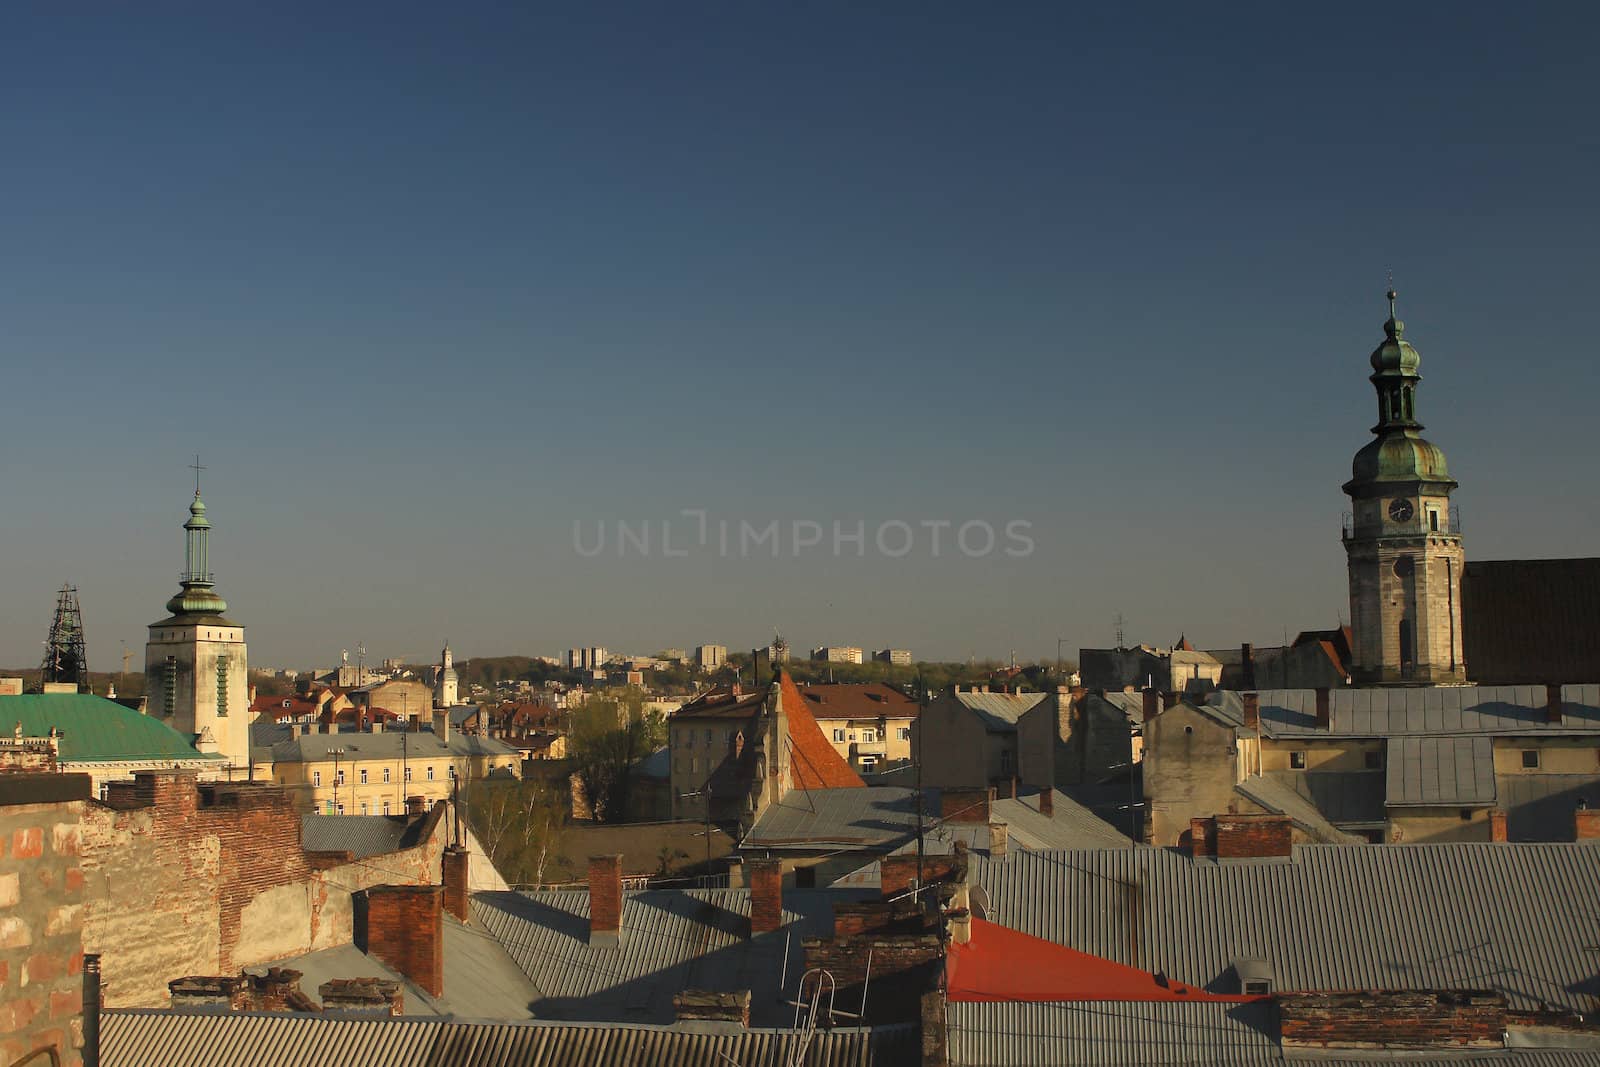 View of the old city of Lviv - the city's rooftops and the Bernardine Monastery by cococinema